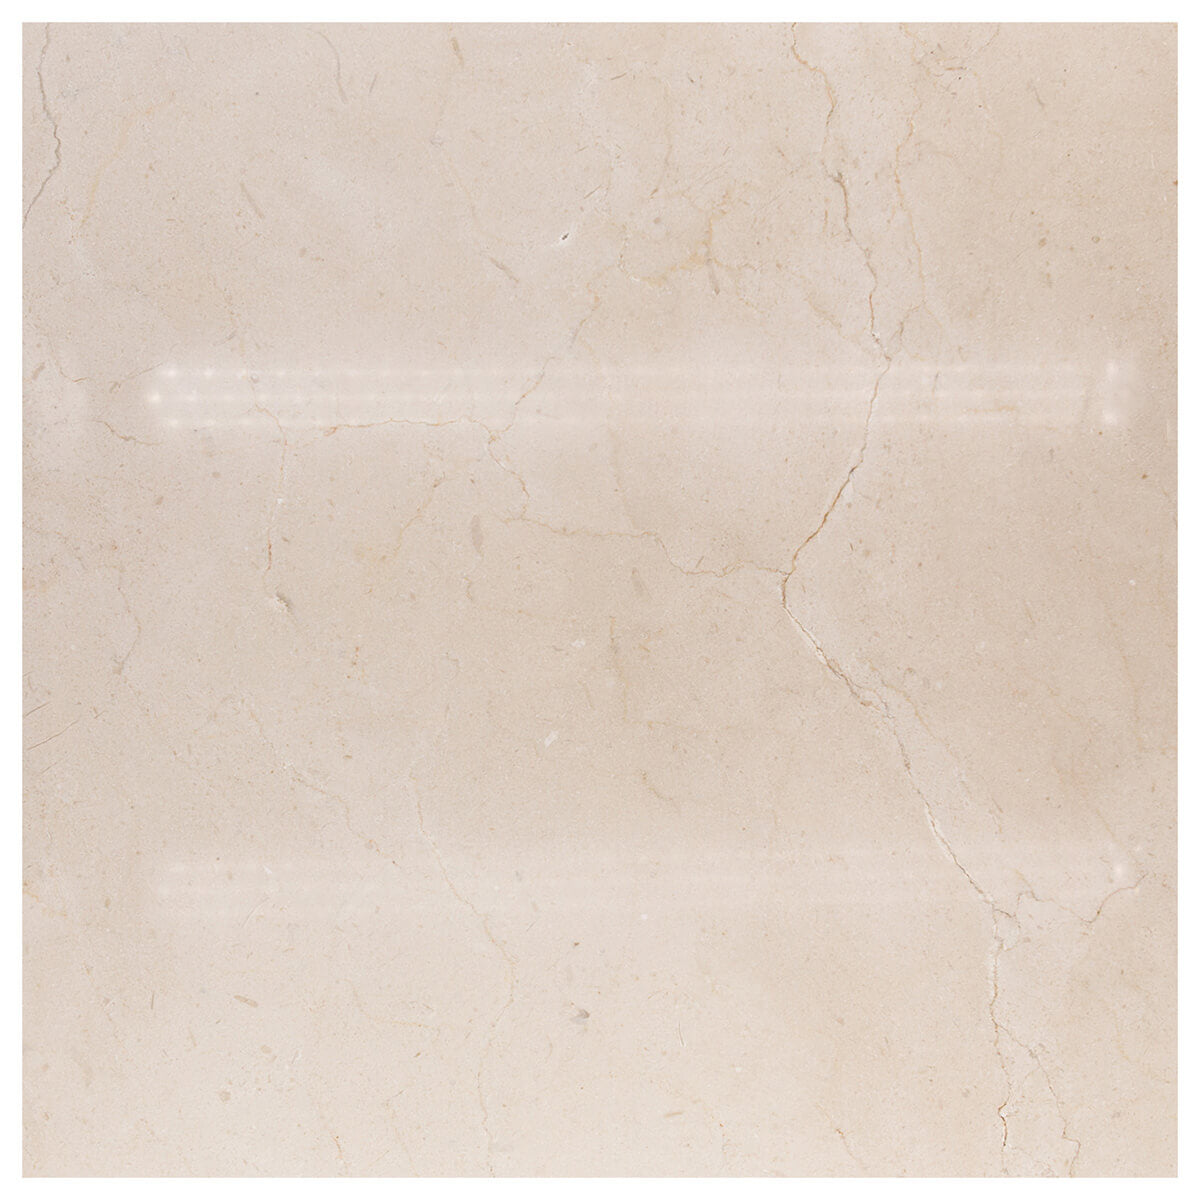 Crema Marfil limestone field tile with polished finish and straight edges, 18x18x0.5 inches.